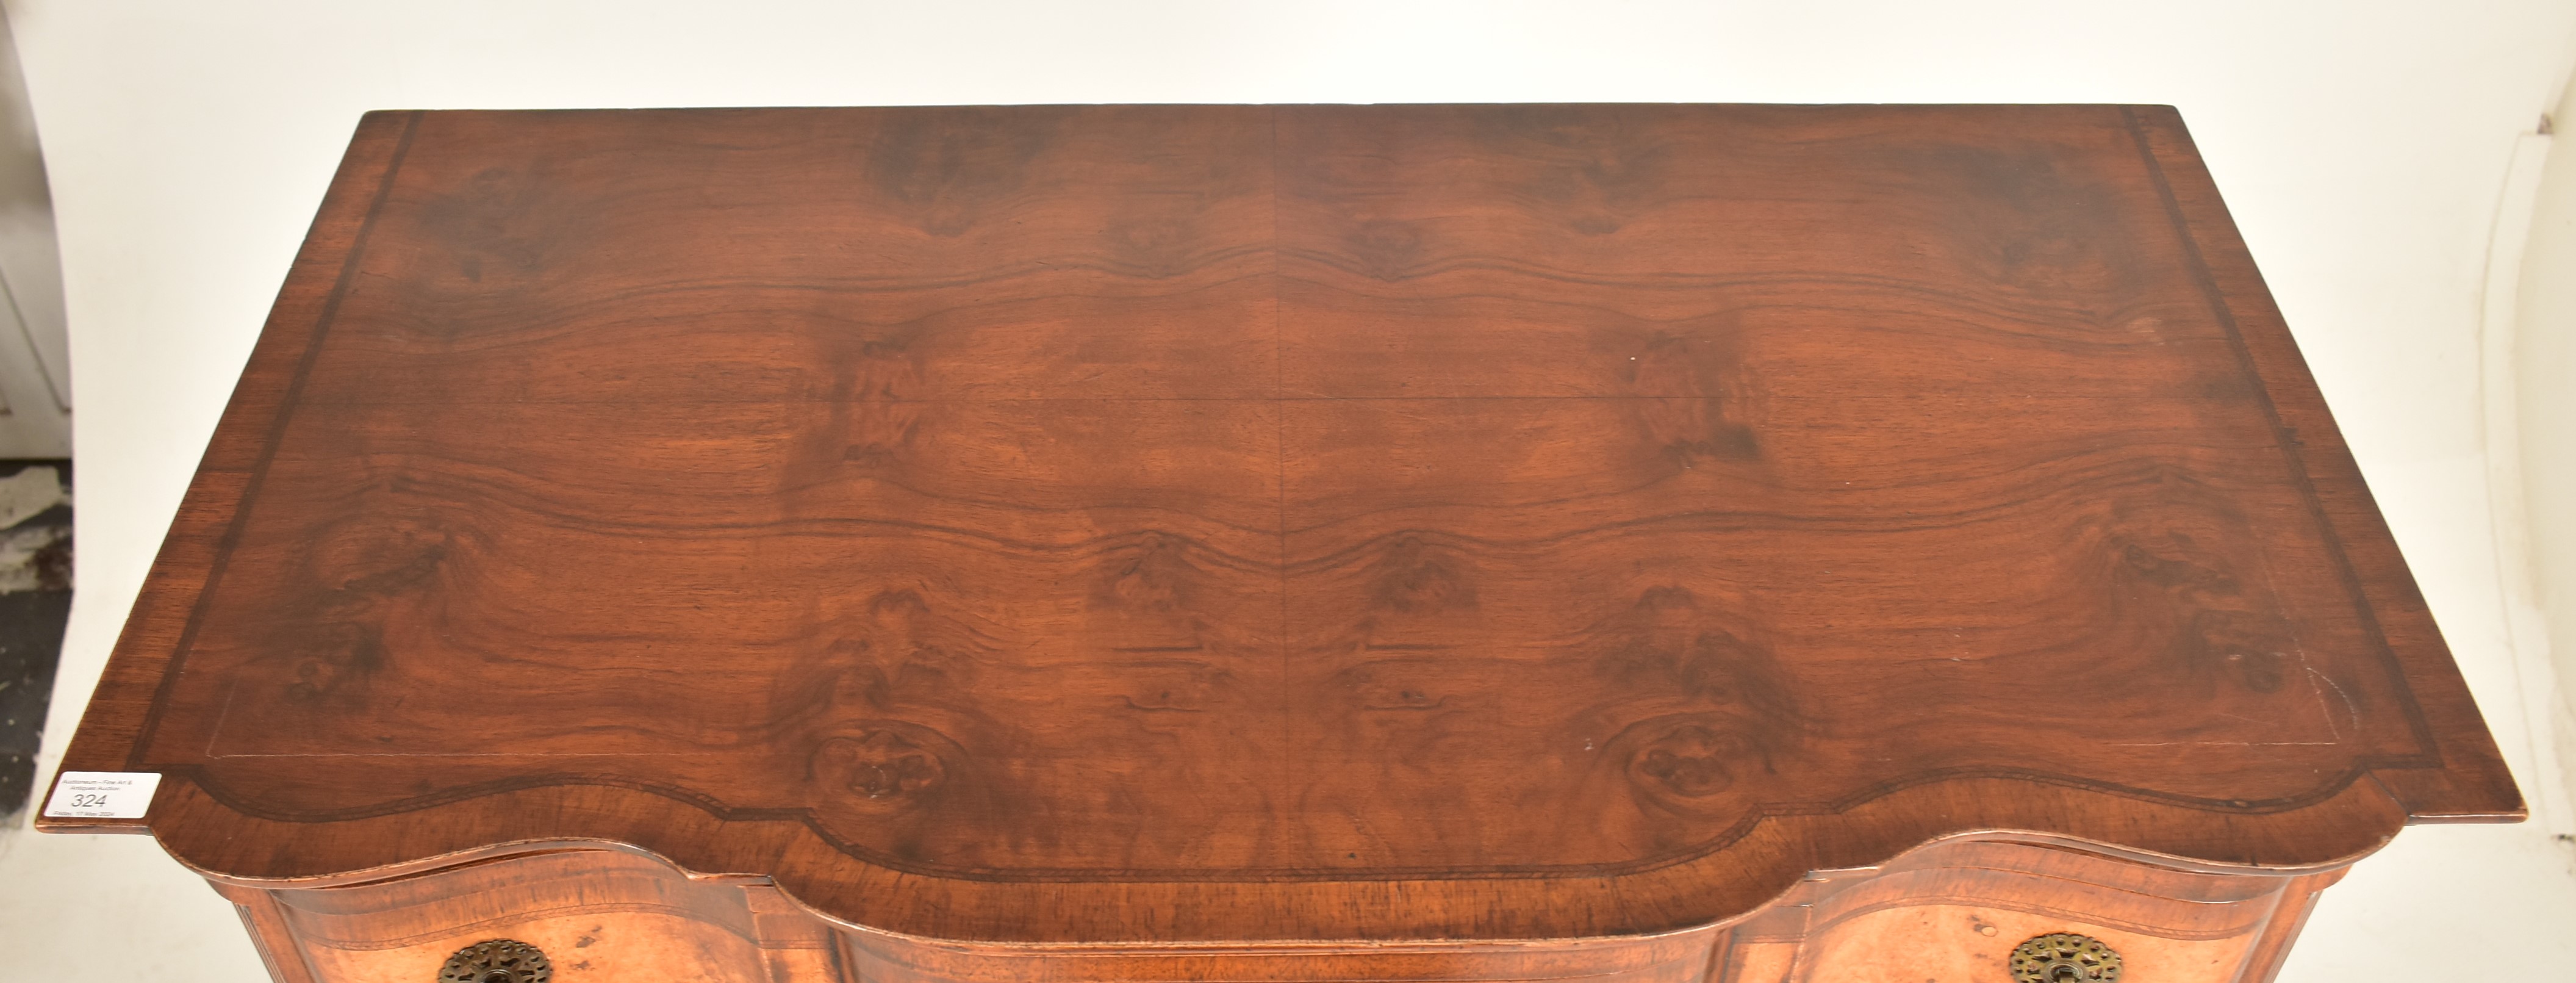 QUEEN ANNE REVIVAL WALNUT SERPENTINE FRONT CHEST ON LEGS - Image 6 of 6